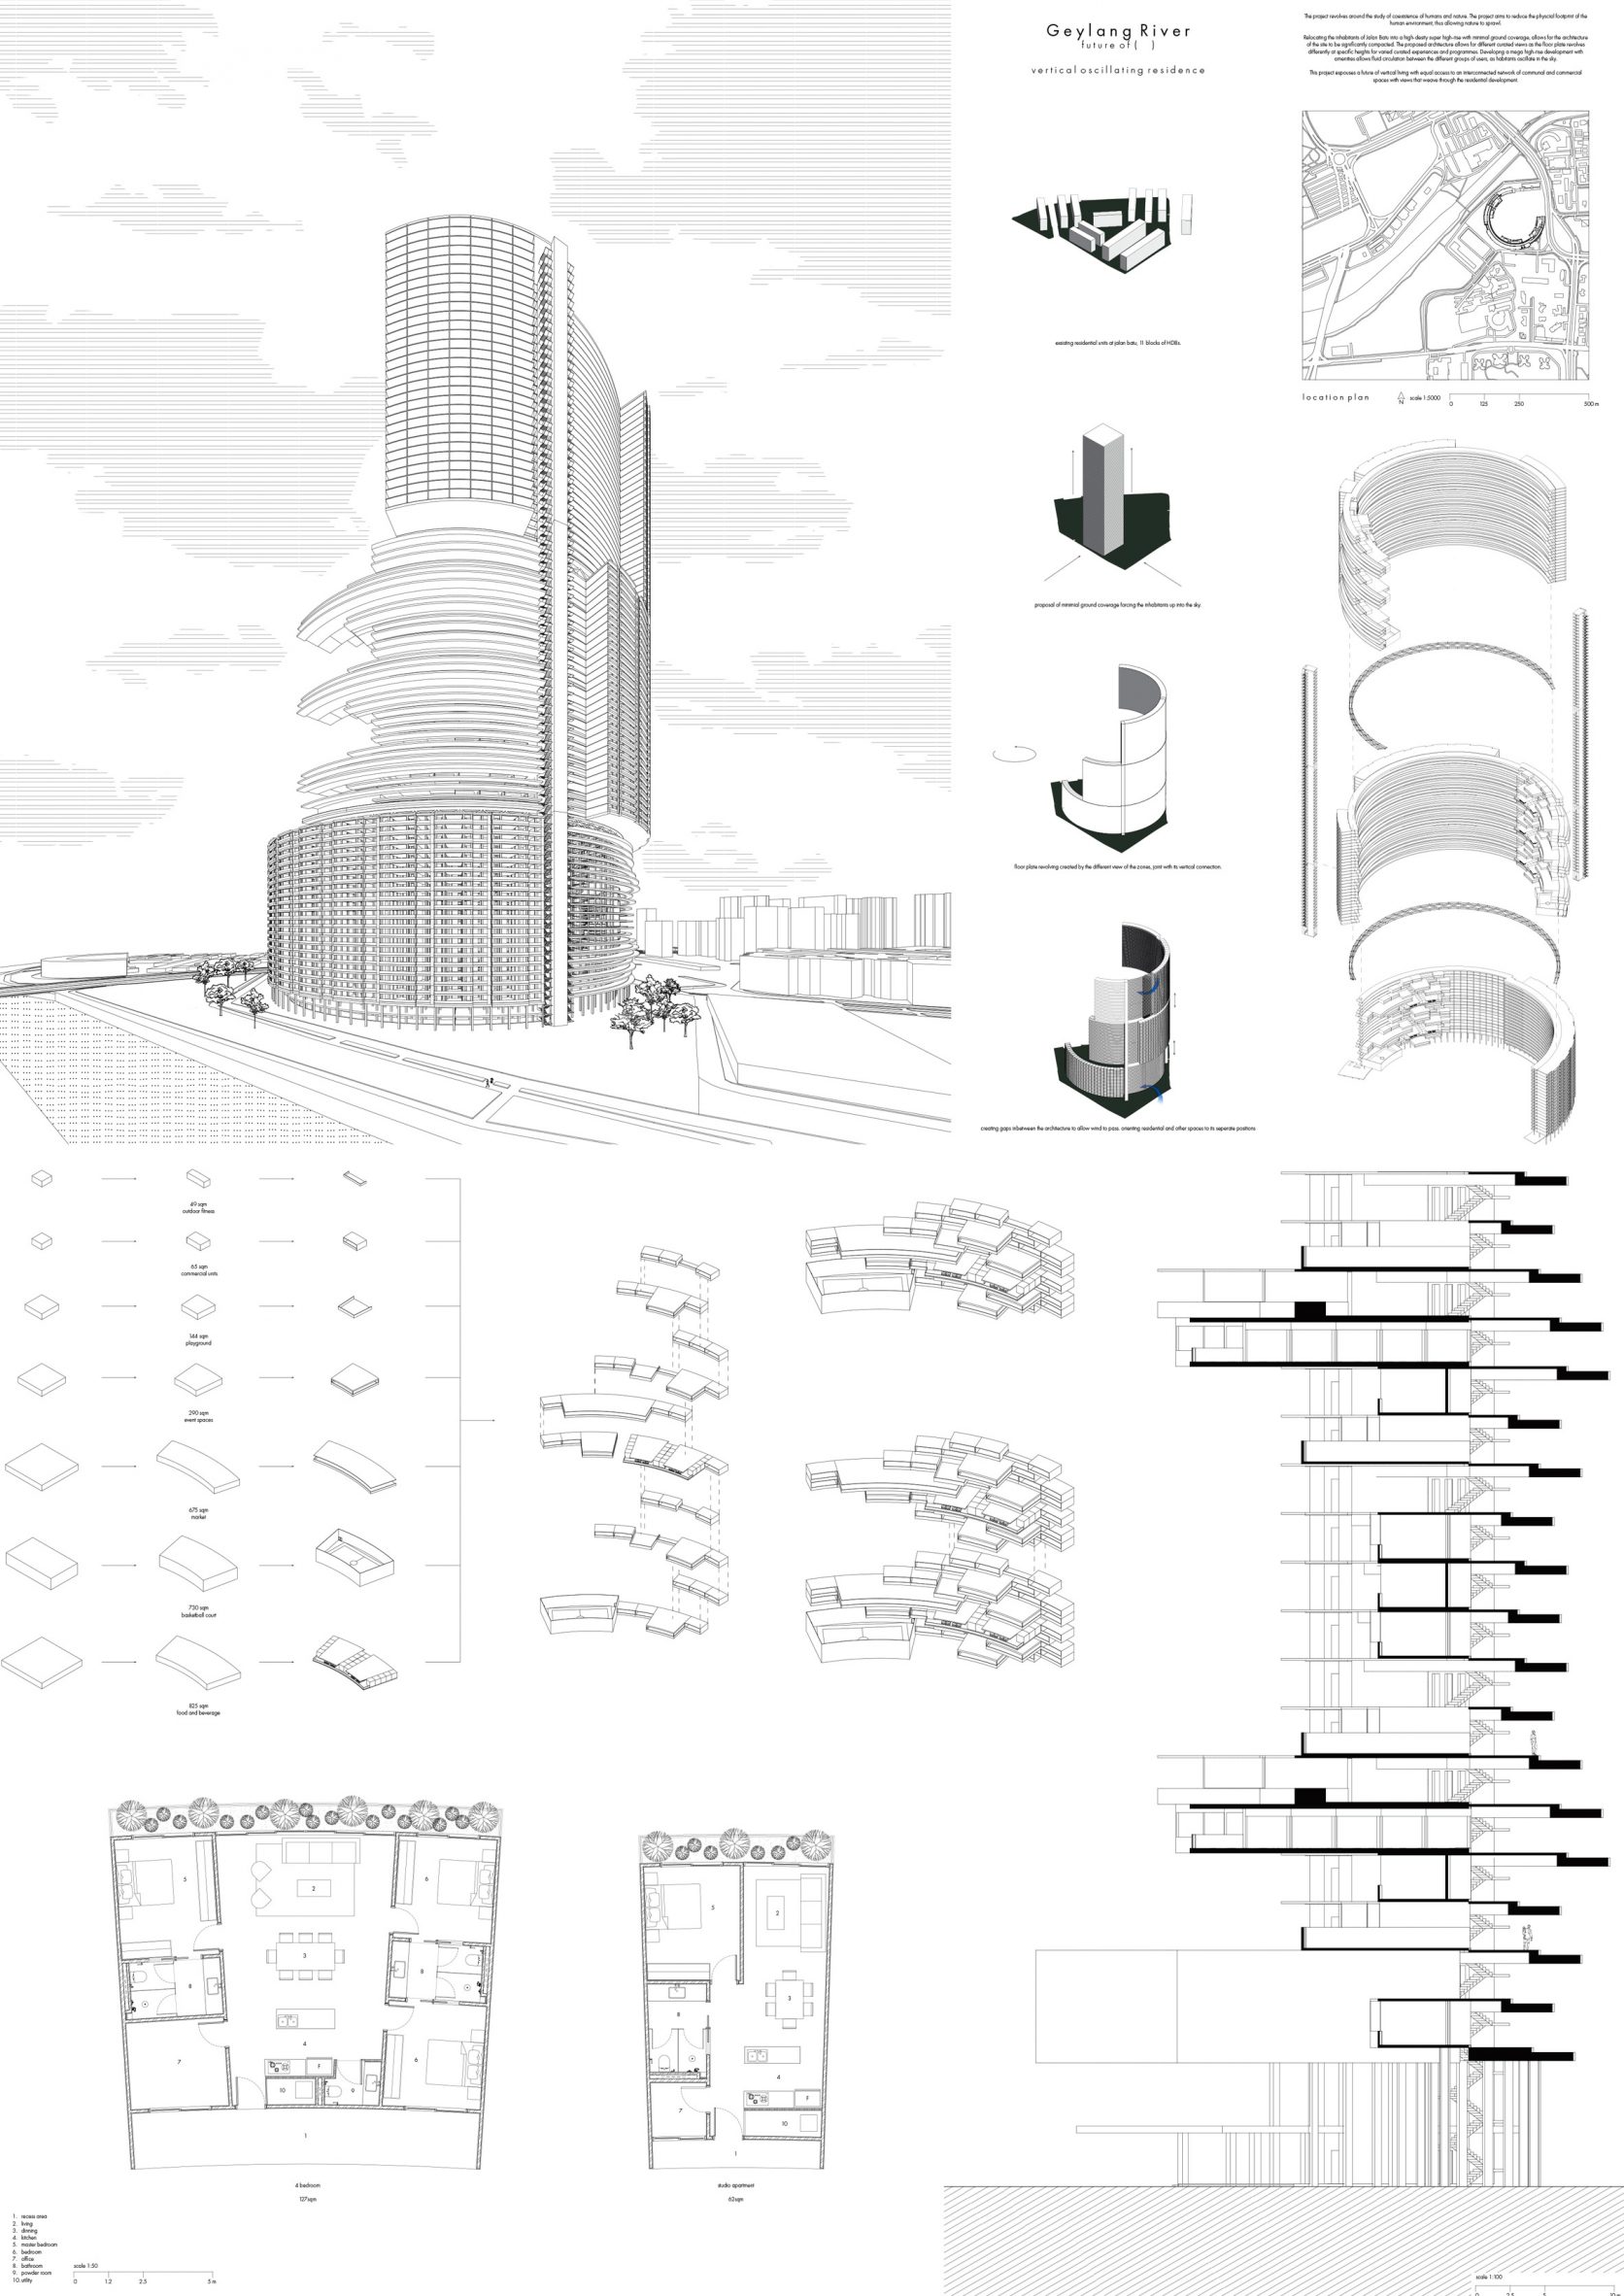 Drawings of Vertical Oscillating Residence